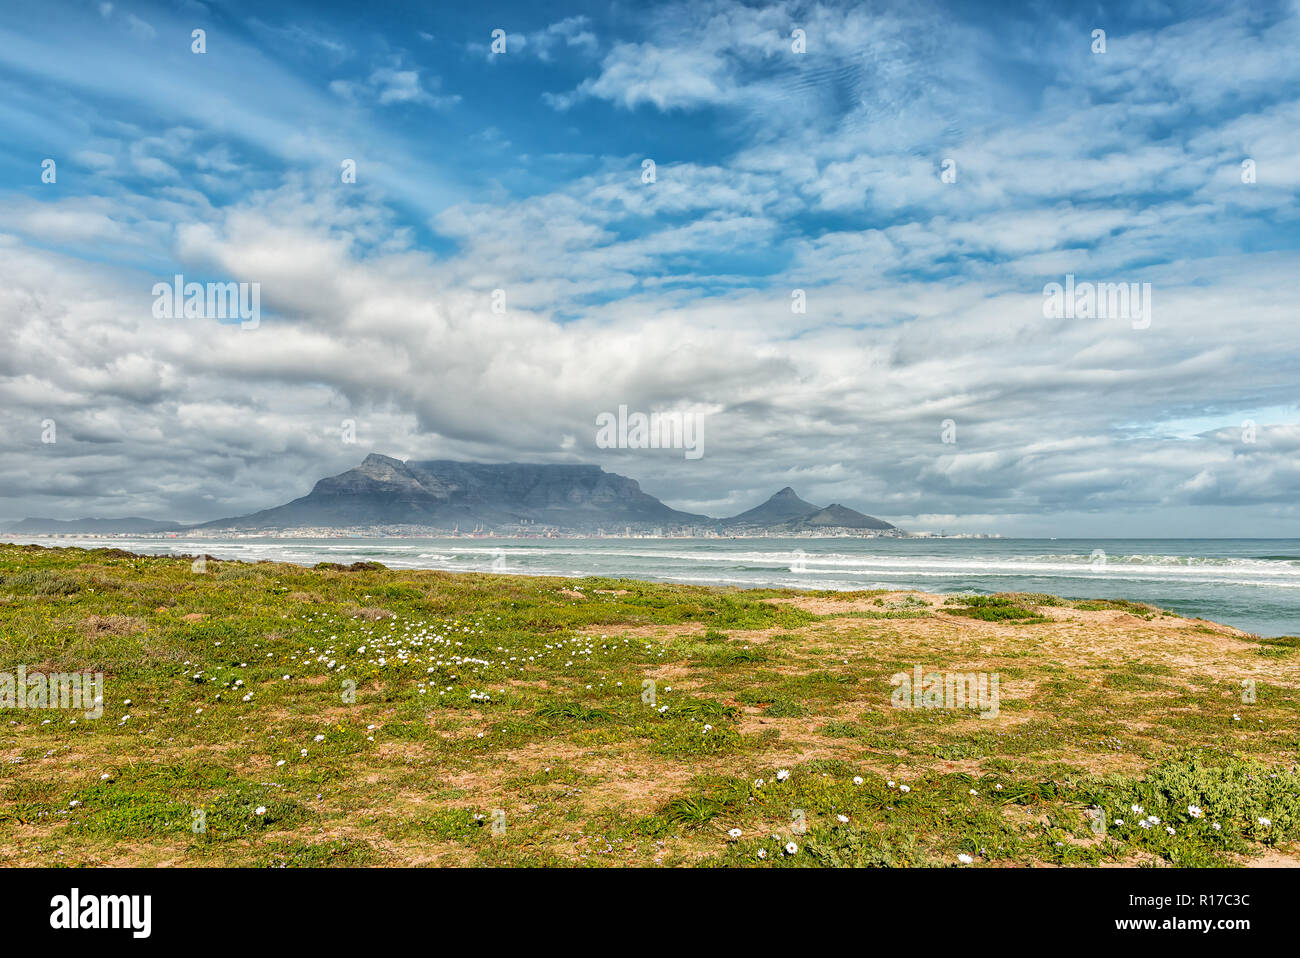 The Cape Town Central Business District and Table Mountain as seen across Table Bay from Dolphin Beach in Bloubergstrand Stock Photo